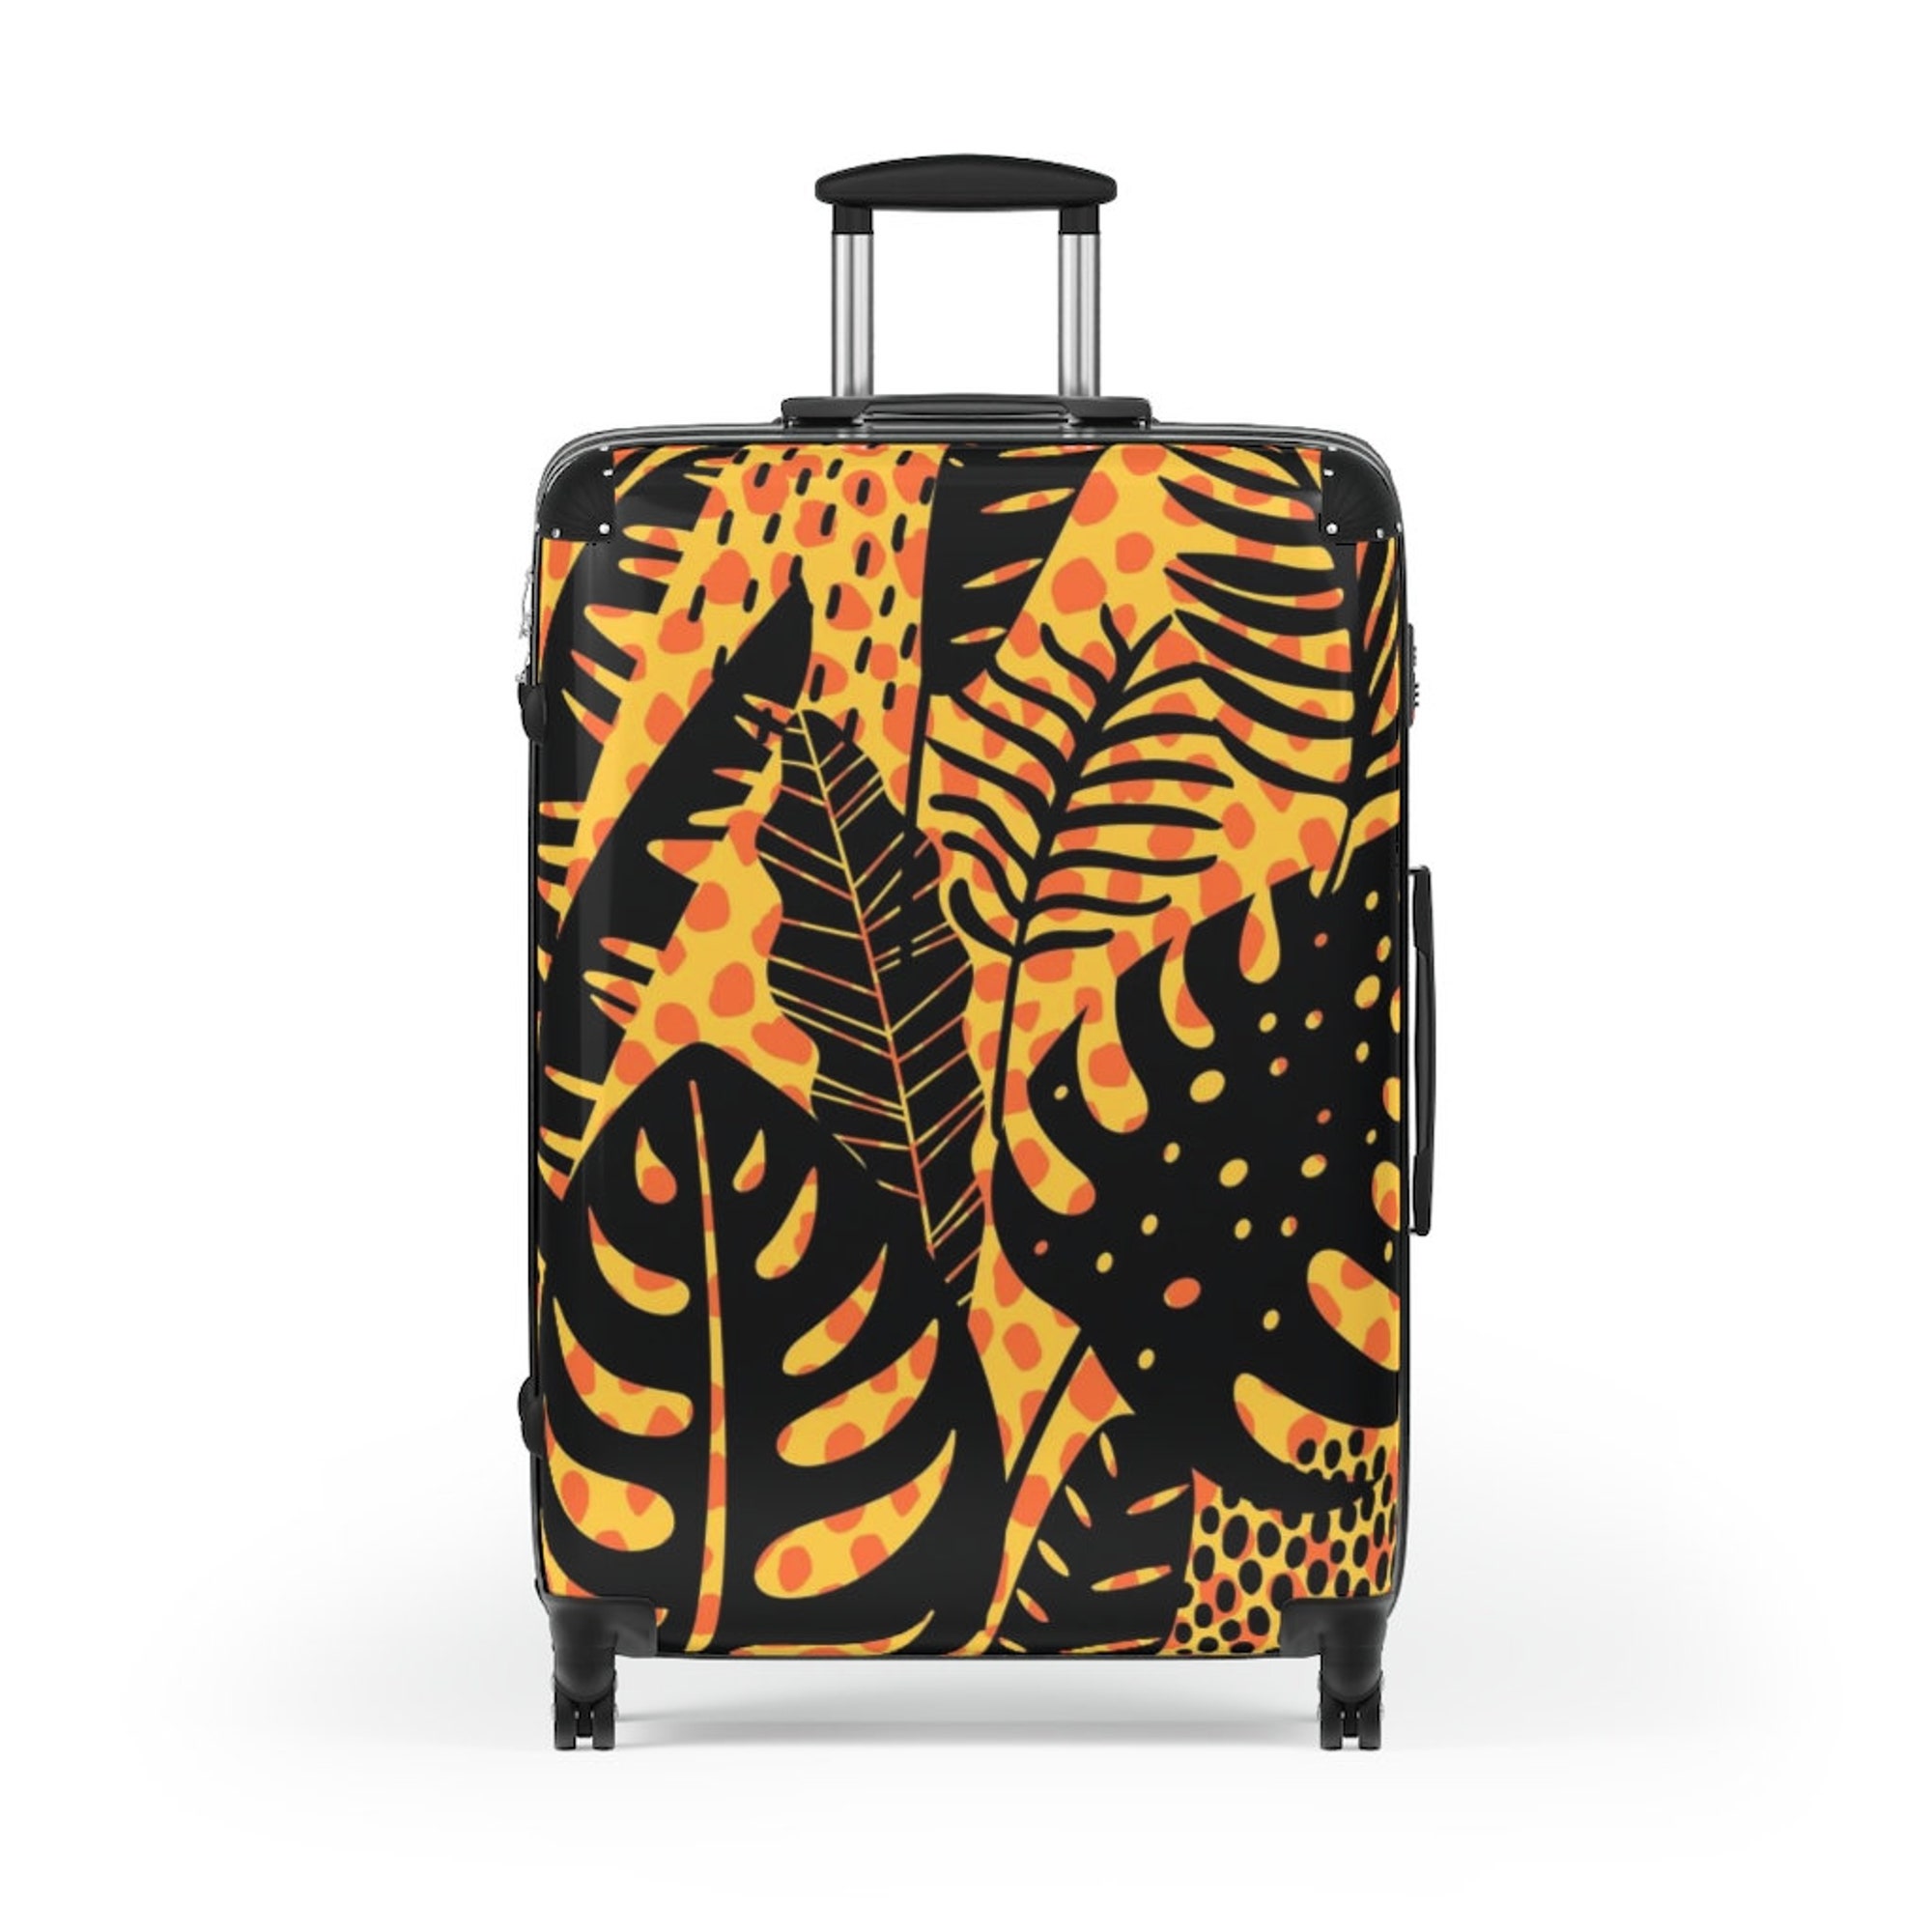 Discover The Wild Jungle Suitcase